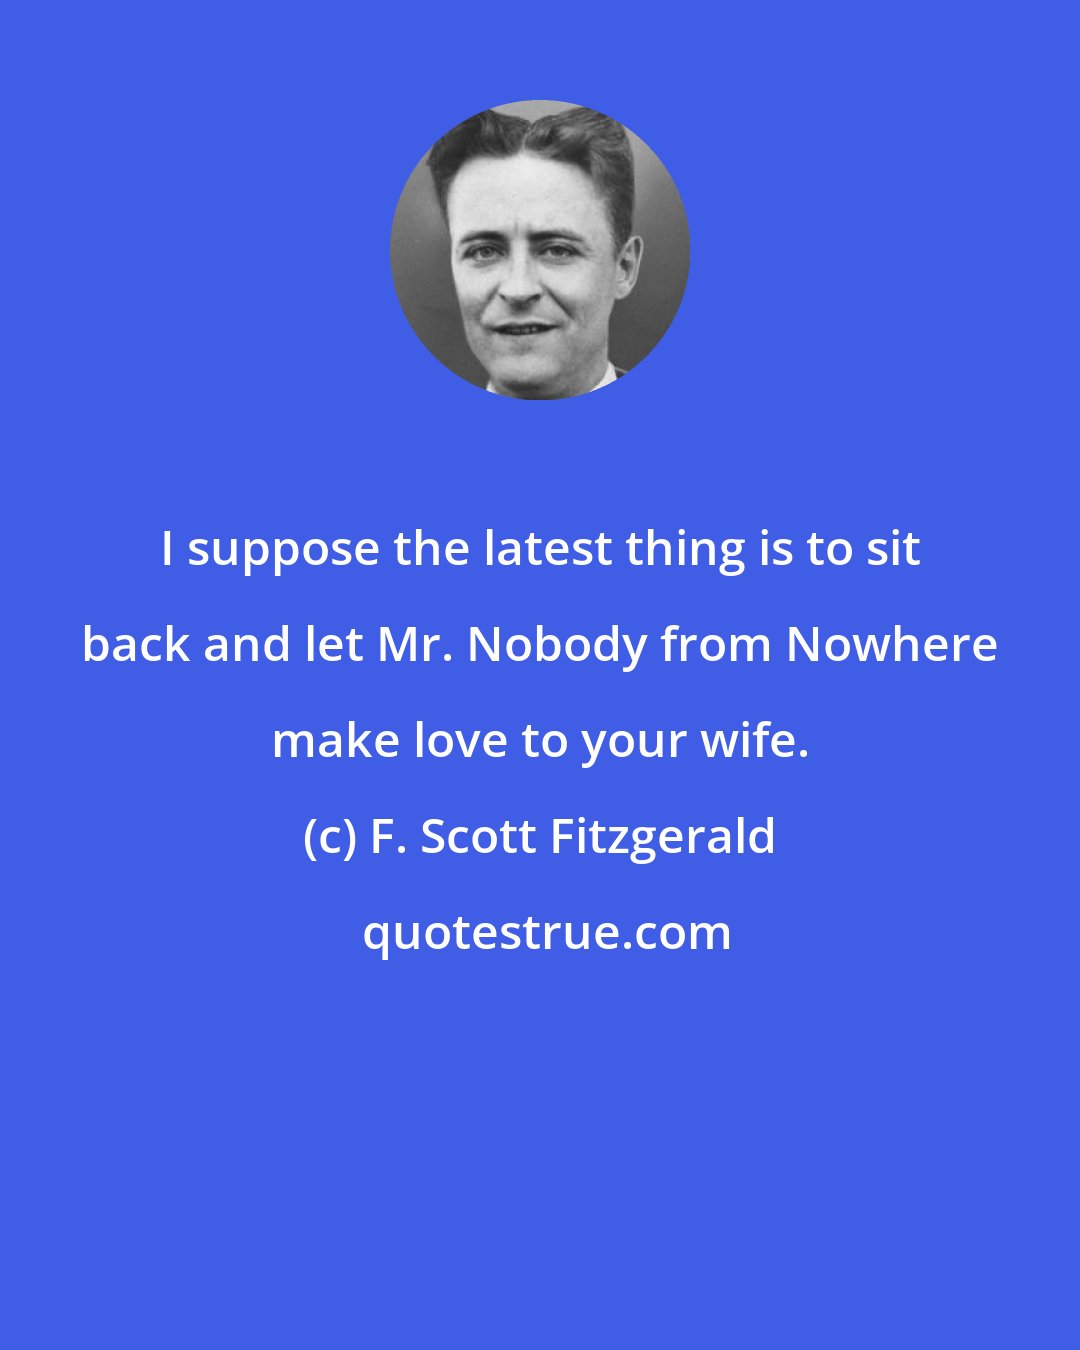 F. Scott Fitzgerald: I suppose the latest thing is to sit back and let Mr. Nobody from Nowhere make love to your wife.